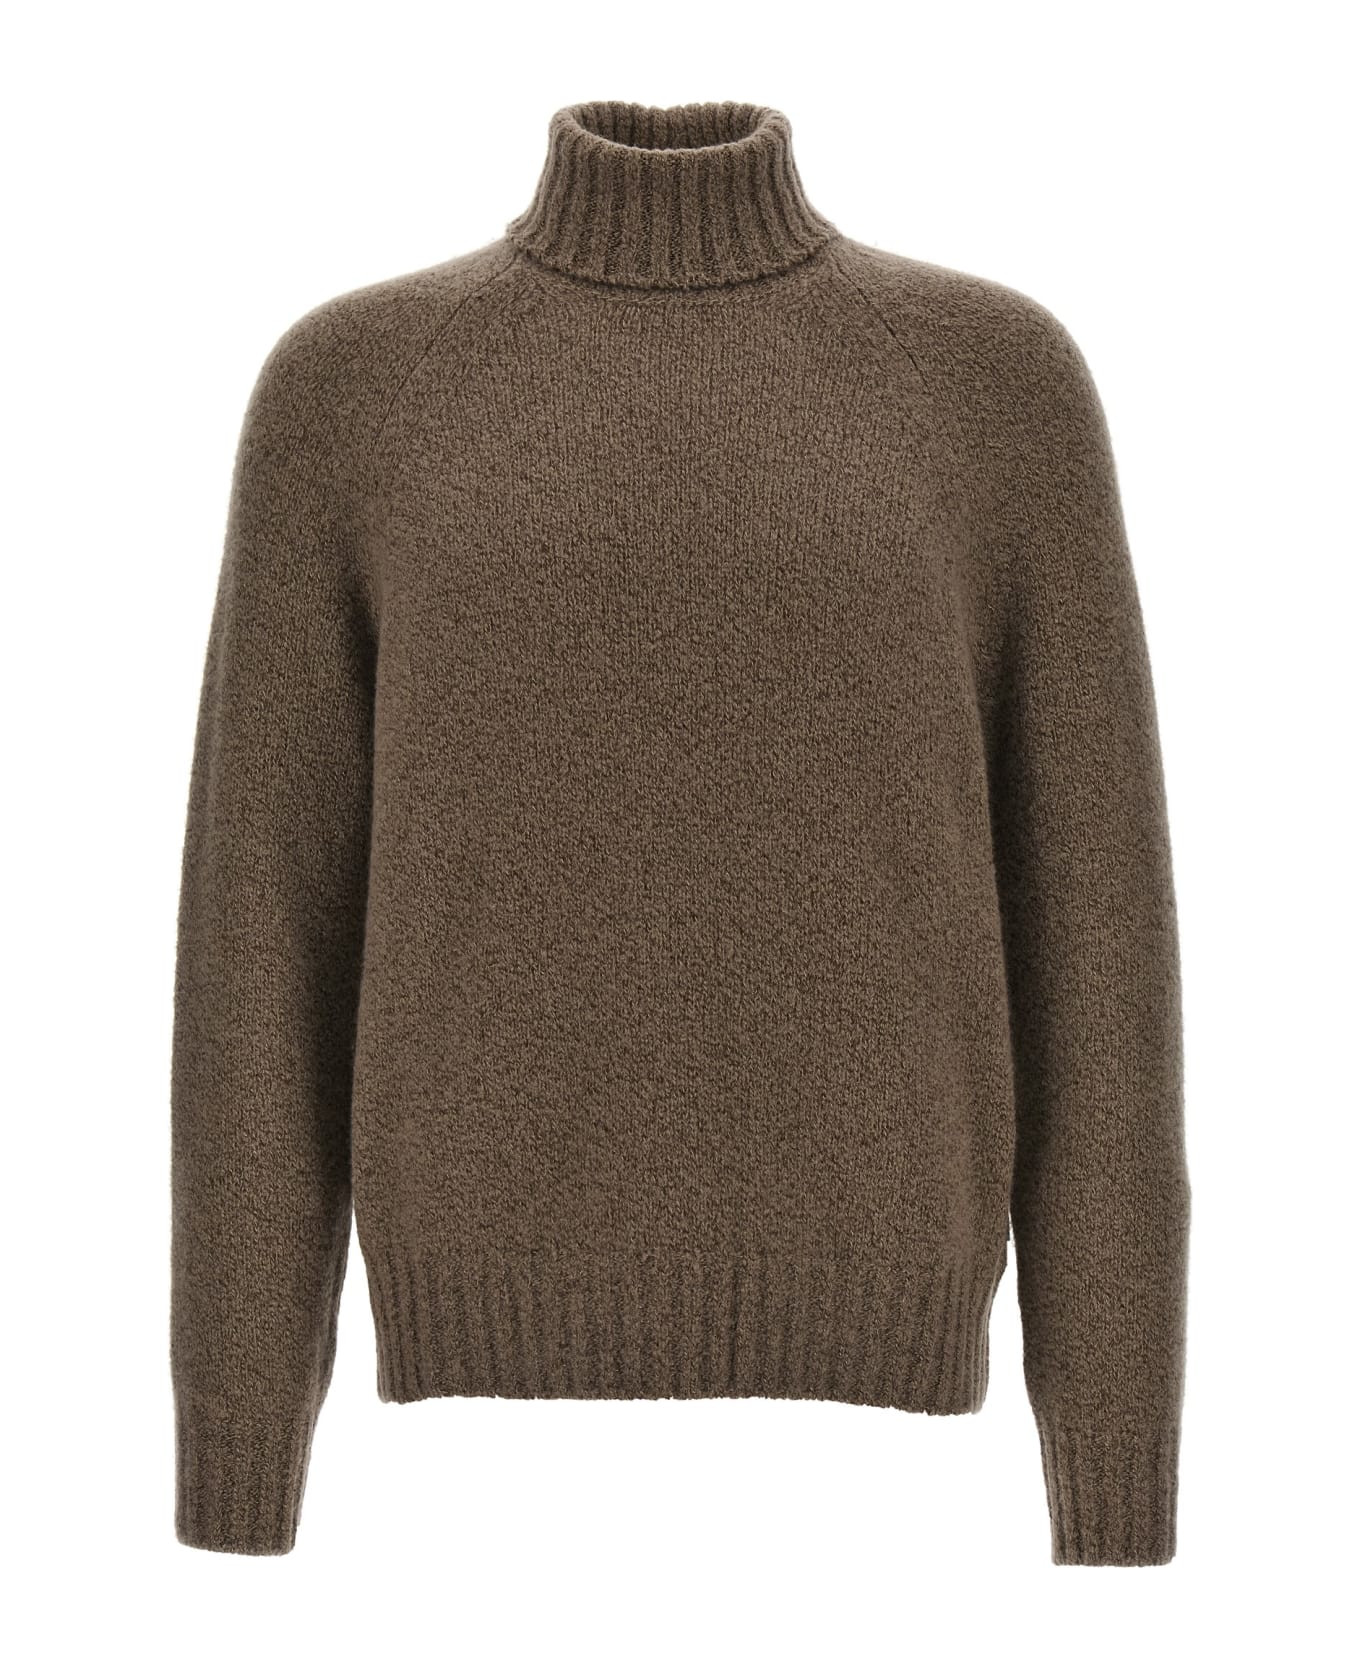 Zegna Boucle Silk Cashmere Sweater - BROWN